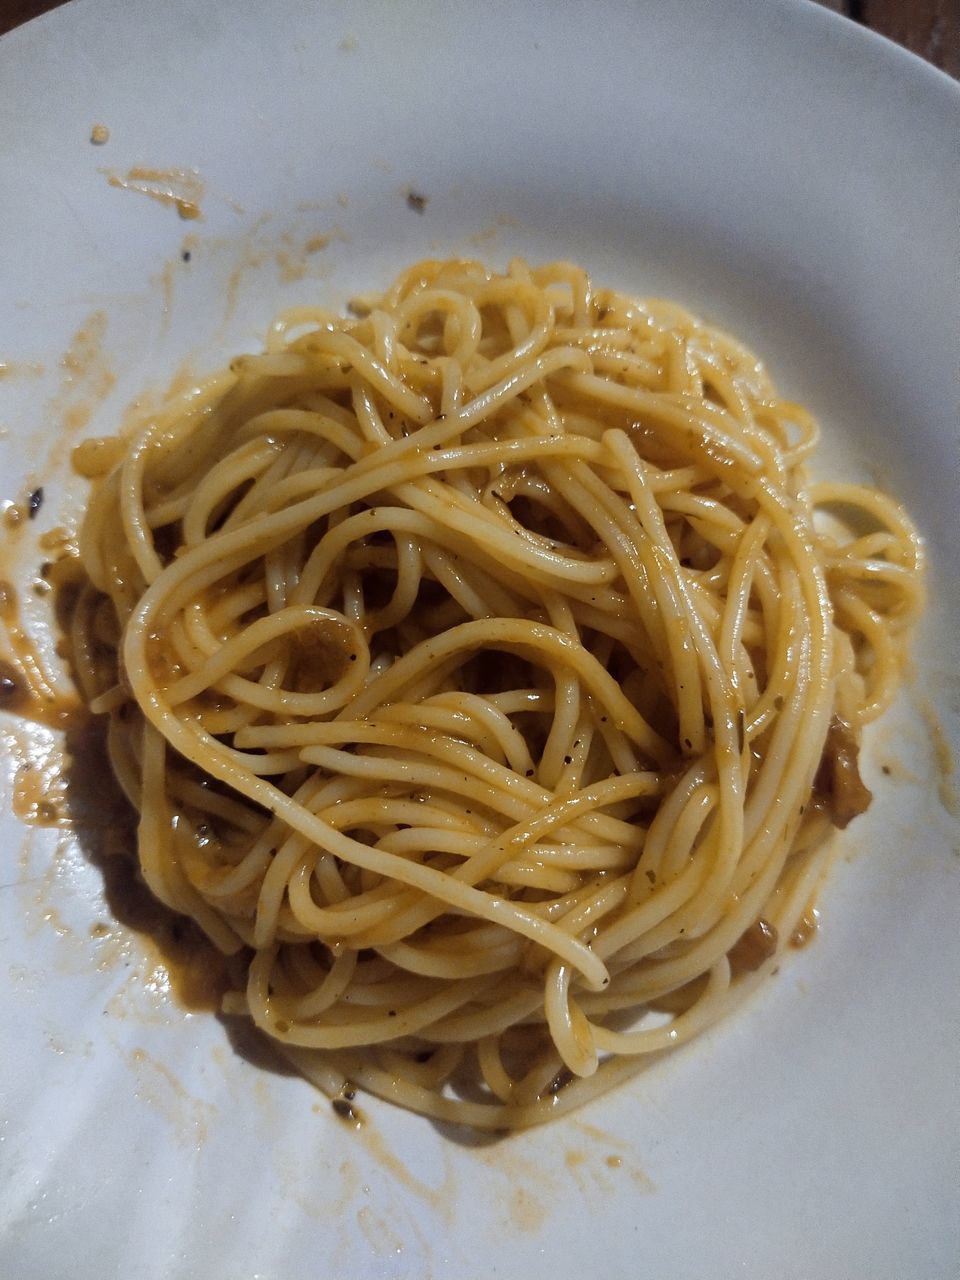 pasta, italian food, food, food and drink, freshness, cuisine, dish, spaghetti, indoors, pici, carbonara, plate, wellbeing, still life, no people, high angle view, healthy eating, spaghetti aglio e olio, directly above, close-up, noodle, serving size, table, produce